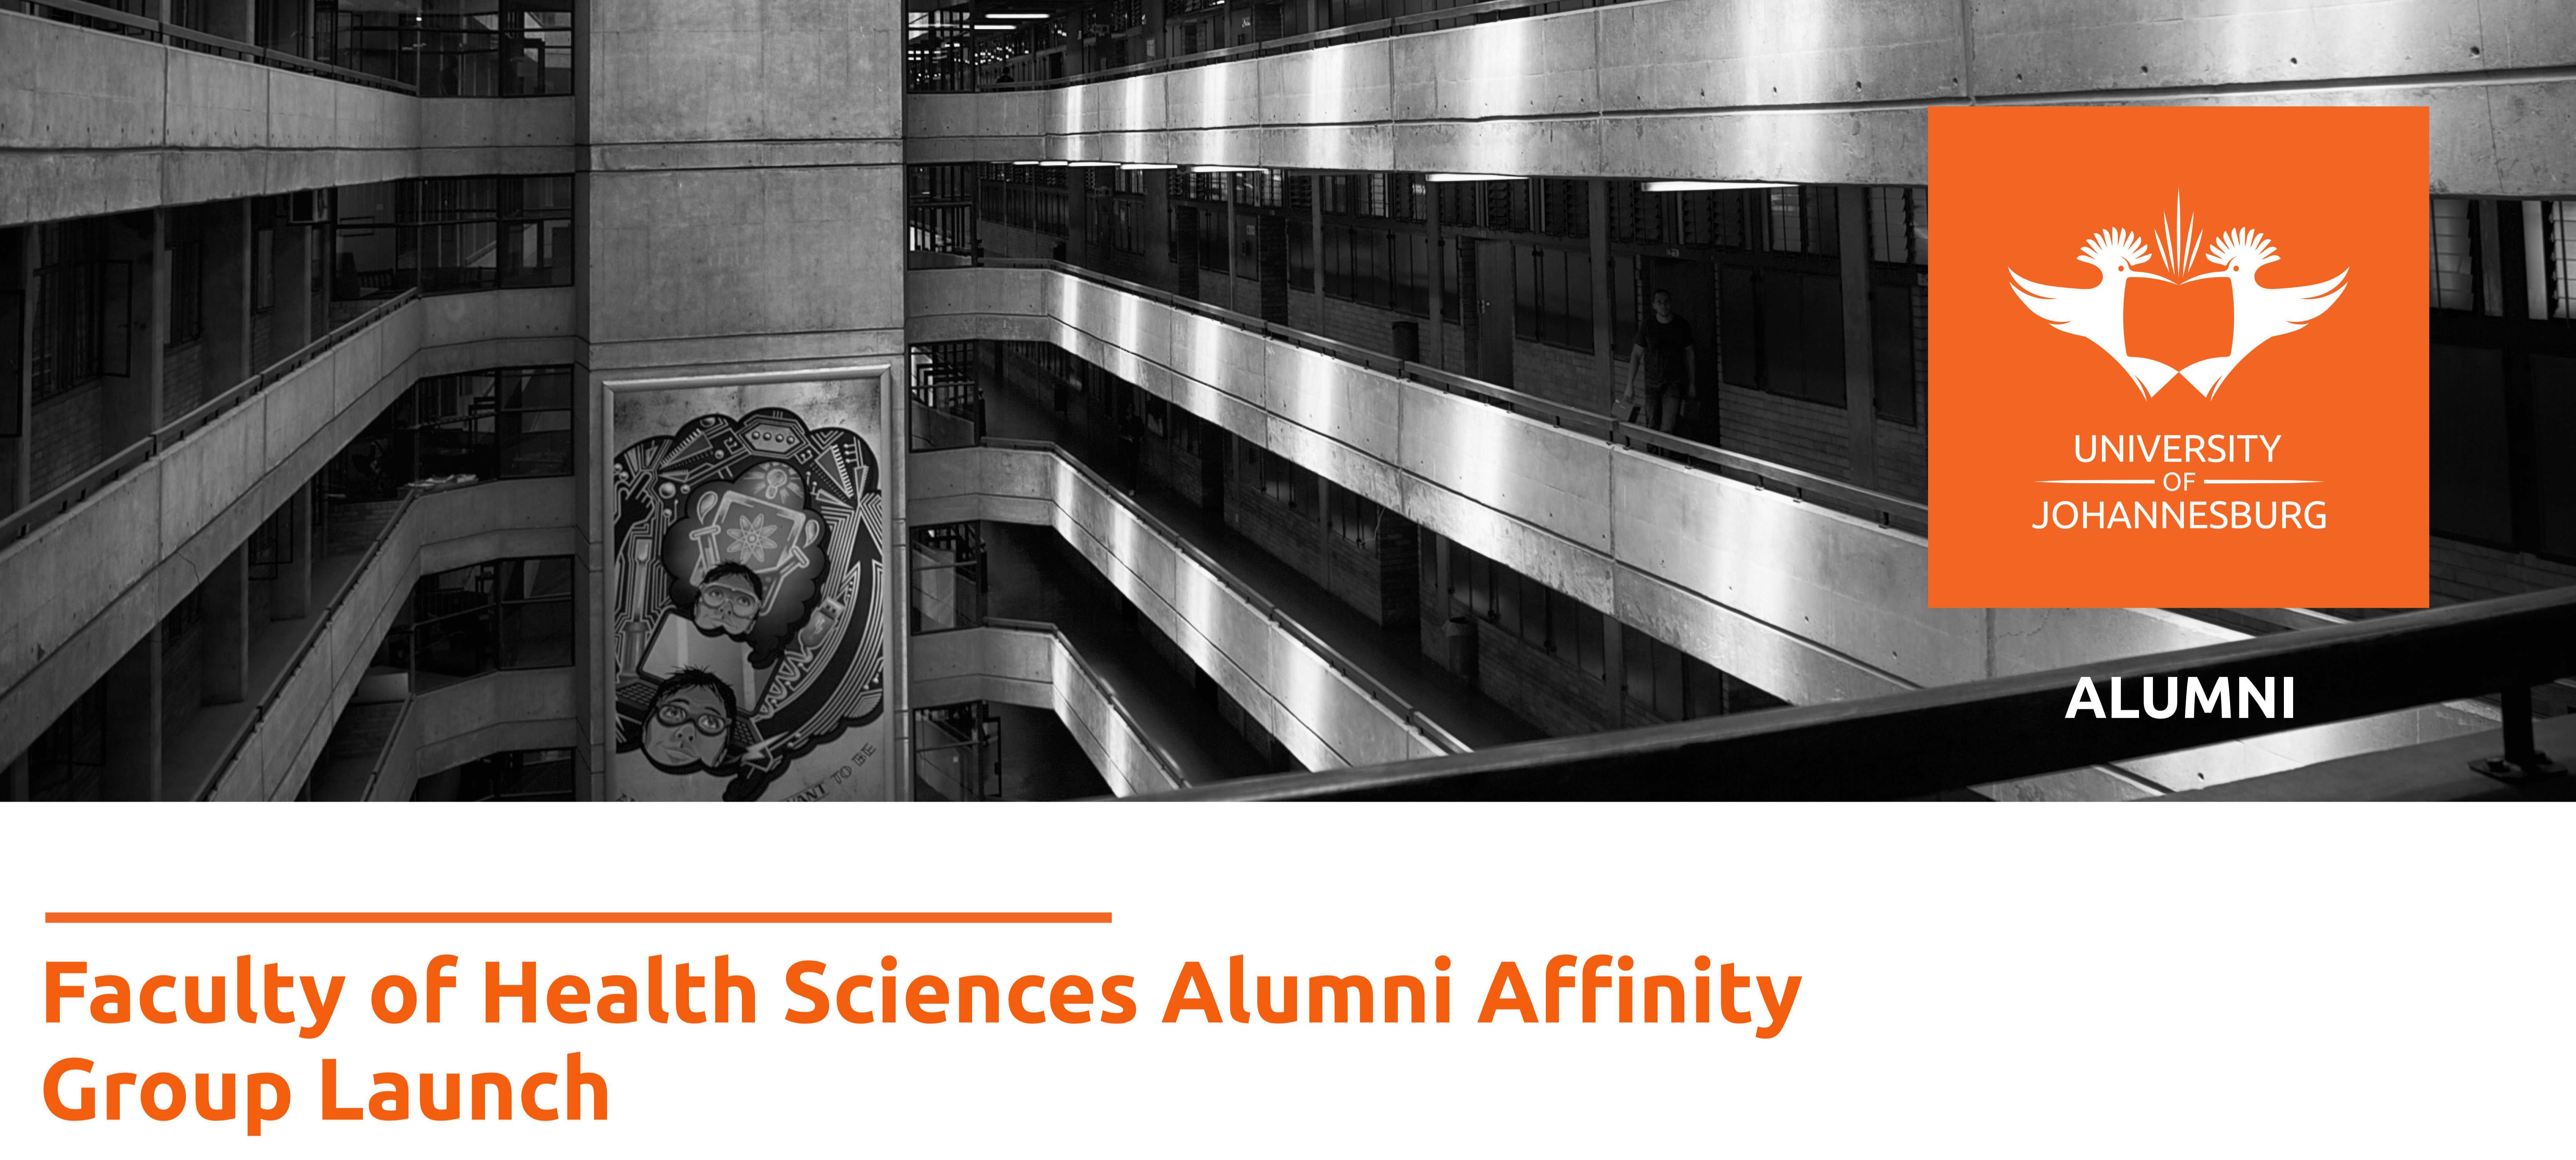 Faculty Of Health Sciences Alumni Affinity Group Launch 2 Website Image